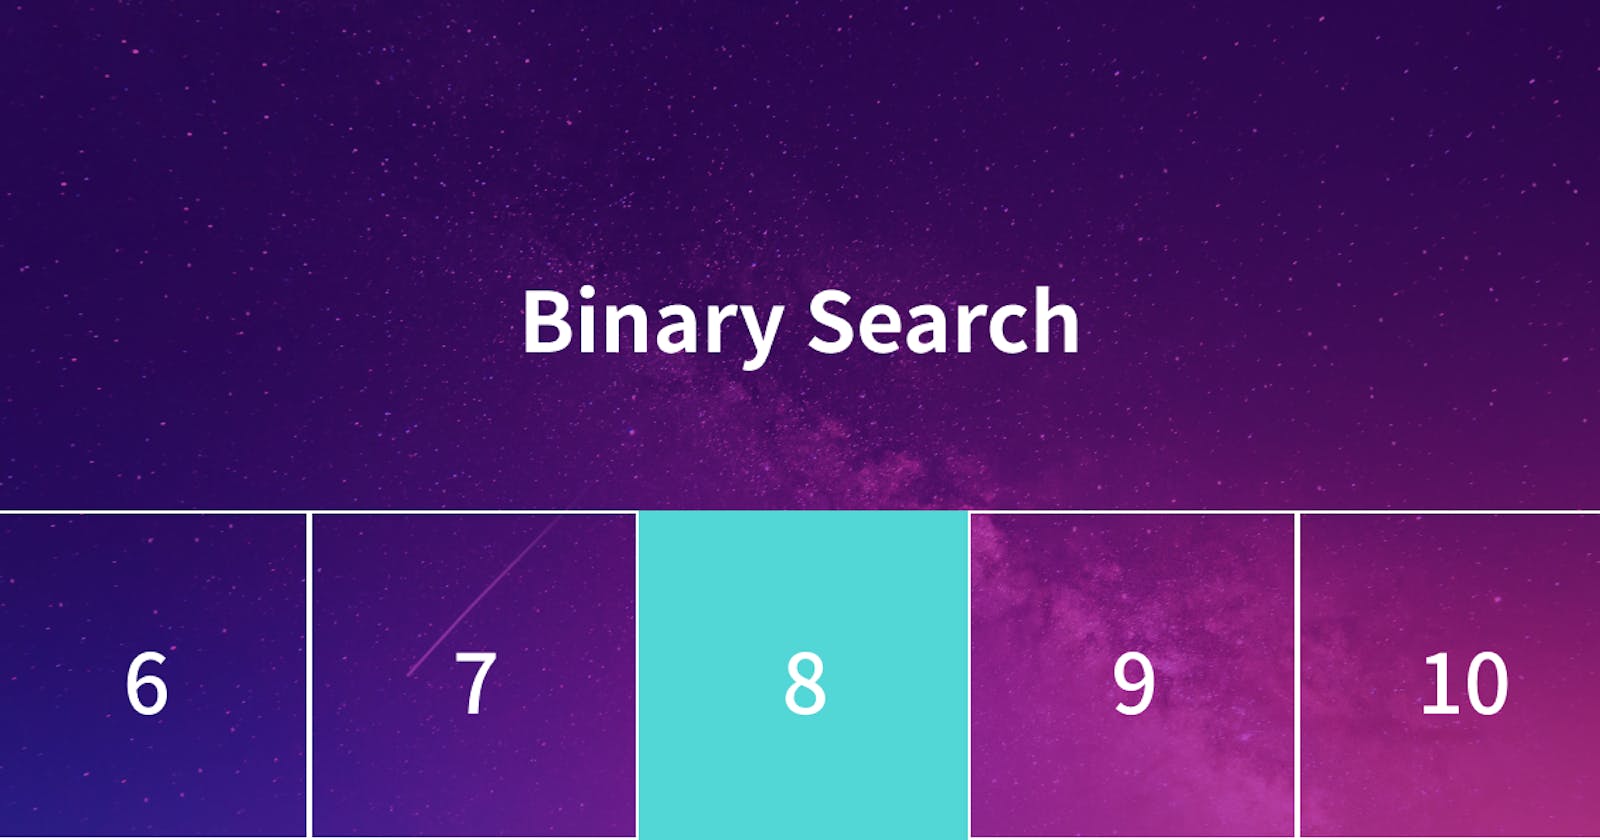 Binary Search: What It is and How to Implement It